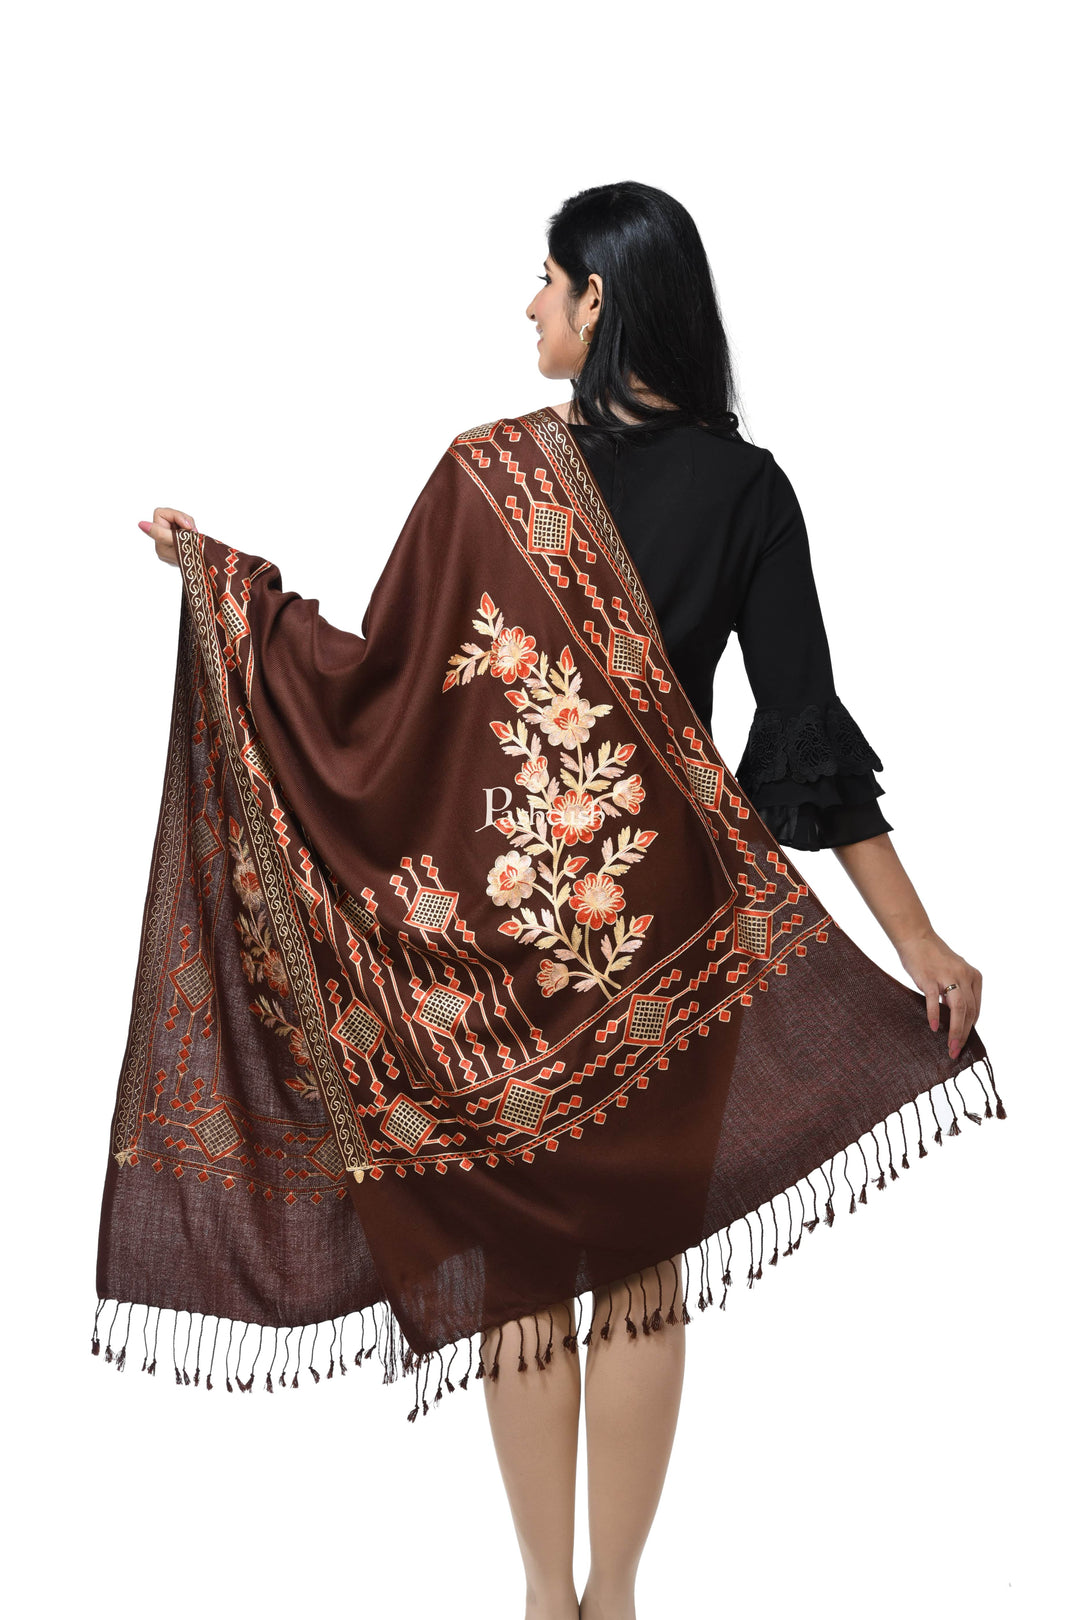 Pashwool Womens Stoles and Scarves Scarf Pashwool Womens Kashmiri Embroidery Stole, Soft And Warm, Woollen Stole Coffee